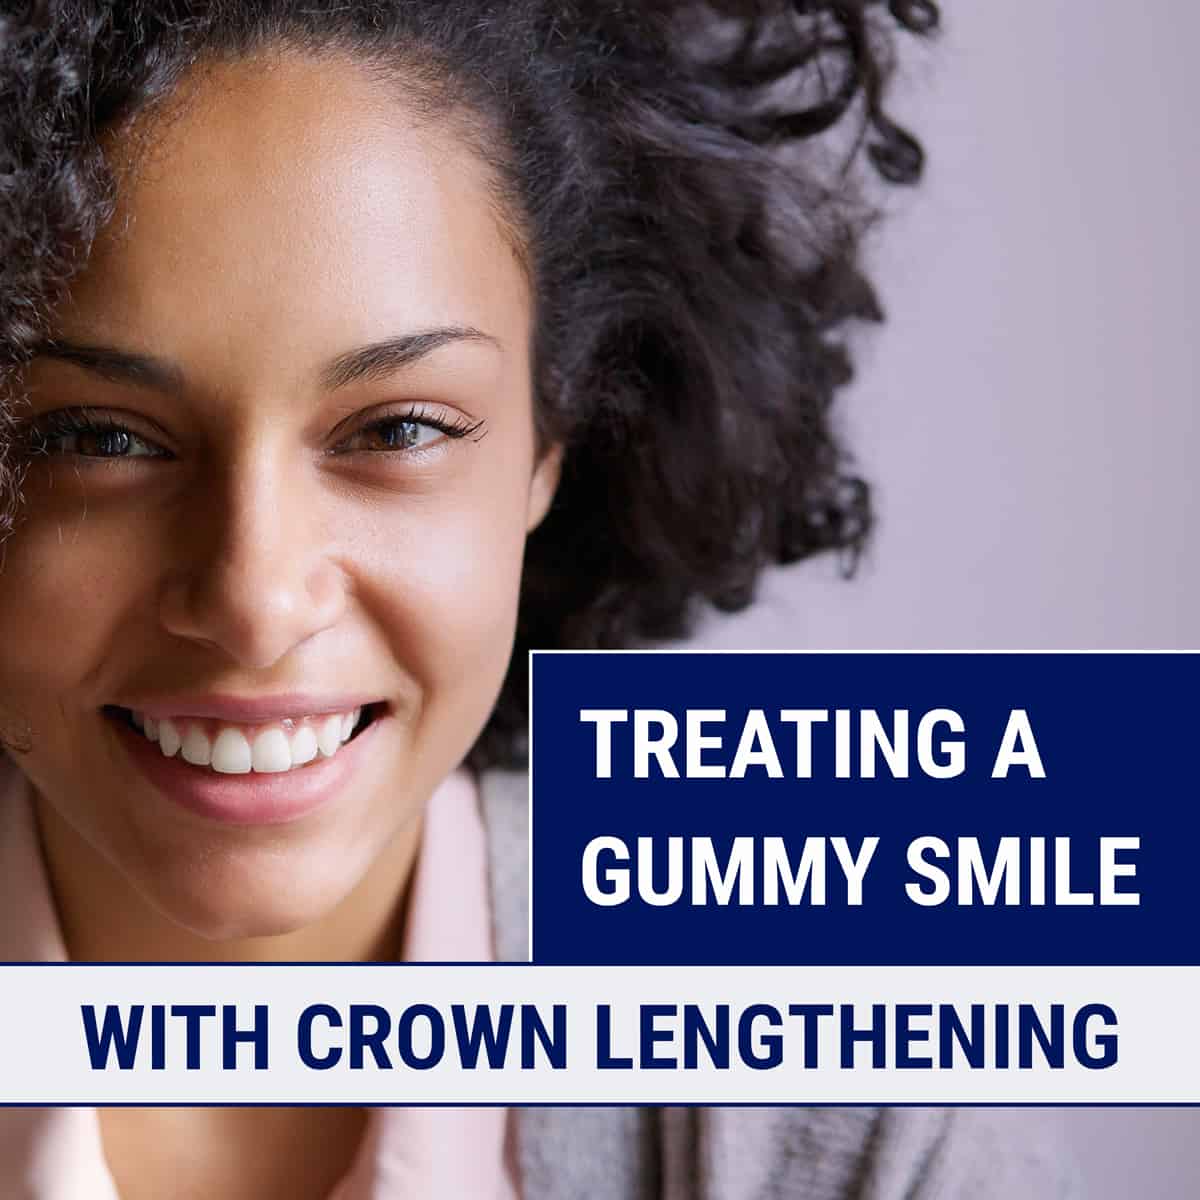 Treating A Gummy Smile with Crown Lengthening